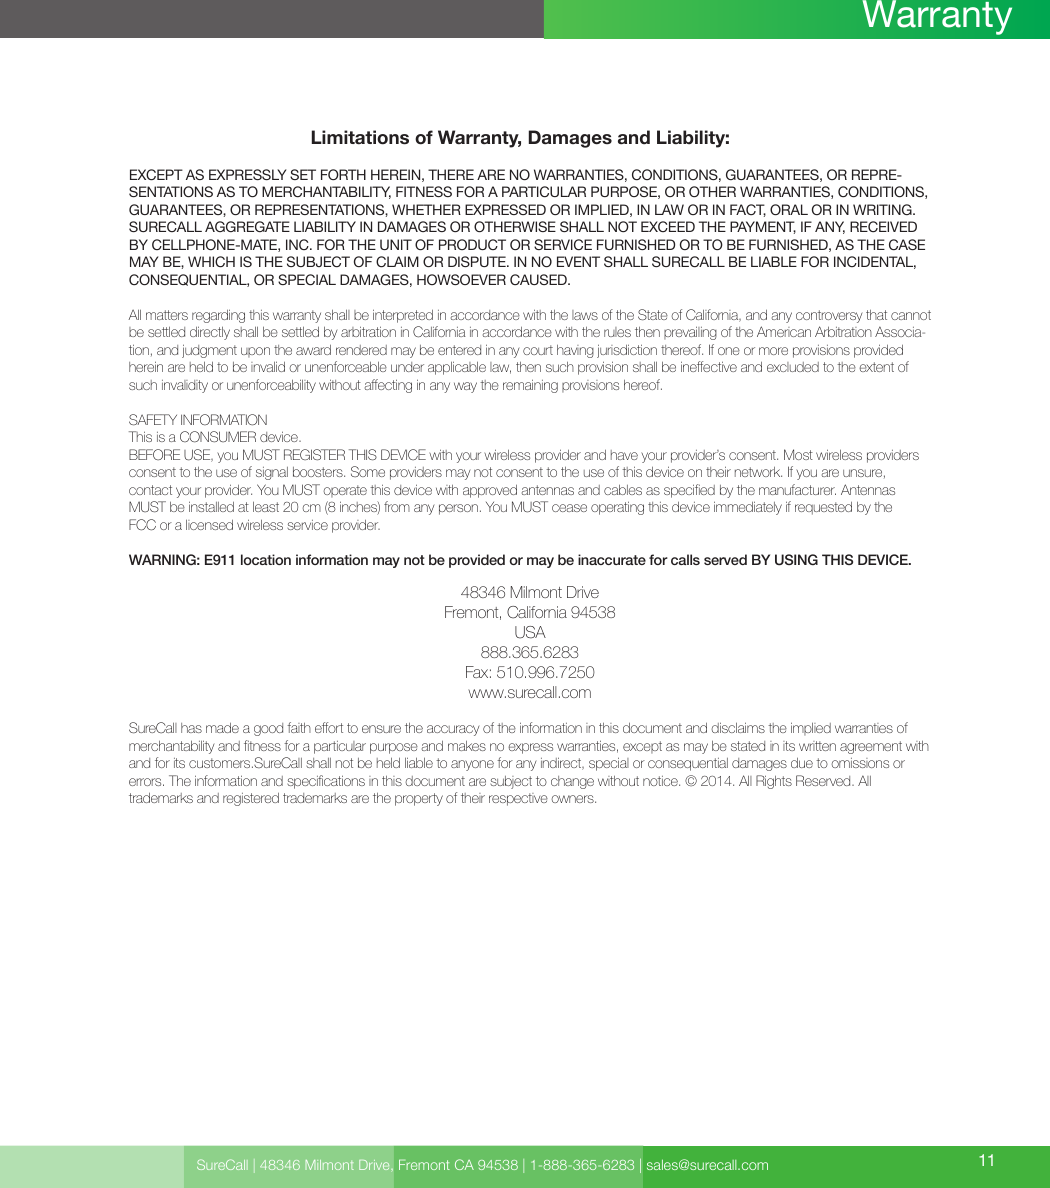 Limitations of Warranty, Damages and Liability:EXCEPT AS EXPRESSLY SET FORTH HEREIN, THERE ARE NO WARRANTIES, CONDITIONS, GUARANTEES, OR REPRE-SENTATIONS AS TO MERCHANTABILITY, FITNESS FOR A PARTICULAR PURPOSE, OR OTHER WARRANTIES, CONDITIONS, GUARANTEES, OR REPRESENTATIONS, WHETHER EXPRESSED OR IMPLIED, IN LAW OR IN FACT, ORAL OR IN WRITING.SURECALL AGGREGATE LIABILITY IN DAMAGES OR OTHERWISE SHALL NOT EXCEED THE PAYMENT, IF ANY, RECEIVED BY CELLPHONE-MATE, INC. FOR THE UNIT OF PRODUCT OR SERVICE FURNISHED OR TO BE FURNISHED, AS THE CASE MAY BE, WHICH IS THE SUBJECT OF CLAIM OR DISPUTE. IN NO EVENT SHALL SURECALL BE LIABLE FOR INCIDENTAL, CONSEQUENTIAL, OR SPECIAL DAMAGES, HOWSOEVER CAUSED. All matters regarding this warranty shall be interpreted in accordance with the laws of the State of California, and any controversy that cannot be settled directly shall be settled by arbitration in California in accordance with the rules then prevailing of the American Arbitration Associa-tion, and judgment upon the award rendered may be entered in any court having jurisdiction thereof. If one or more provisions provided herein are held to be invalid or unenforceable under applicable law, then such provision shall be ineective and excluded to the extent of such invalidity or unenforceability without aecting in any way the remaining provisions hereof.SAFETY INFORMATIONThis is a CONSUMER device.BEFORE USE, you MUST REGISTER THIS DEVICE with your wireless provider and have your provider’s consent. Most wireless providers consent to the use of signal boosters. Some providers may not consent to the use of this device on their network. If you are unsure,  contact your provider. You MUST operate this device with approved antennas and cables as specied by the manufacturer. Antennas MUST be installed at least 20 cm (8 inches) from any person. You MUST cease operating this device immediately if requested by the  FCC or a licensed wireless service provider.WARNING: E911 location information may not be provided or may be inaccurate for calls served BY USING THIS DEVICE.48346 Milmont DriveFremont, California 94538USA888.365.6283Fax: 510.996.7250www.surecall.comSureCall has made a good faith eort to ensure the accuracy of the information in this document and disclaims the implied warranties of merchantability and tness for a particular purpose and makes no express warranties, except as may be stated in its written agreement with and for its customers.SureCall shall not be held liable to anyone for any indirect, special or consequential damages due to omissions or  errors. The information and specications in this document are subject to change without notice. © 2014. All Rights Reserved. All  trademarks and registered trademarks are the property of their respective owners.SureCall | 48346 Milmont Drive, Fremont CA 94538 | 1-888-365-6283 | sales@surecall.com 11Warranty